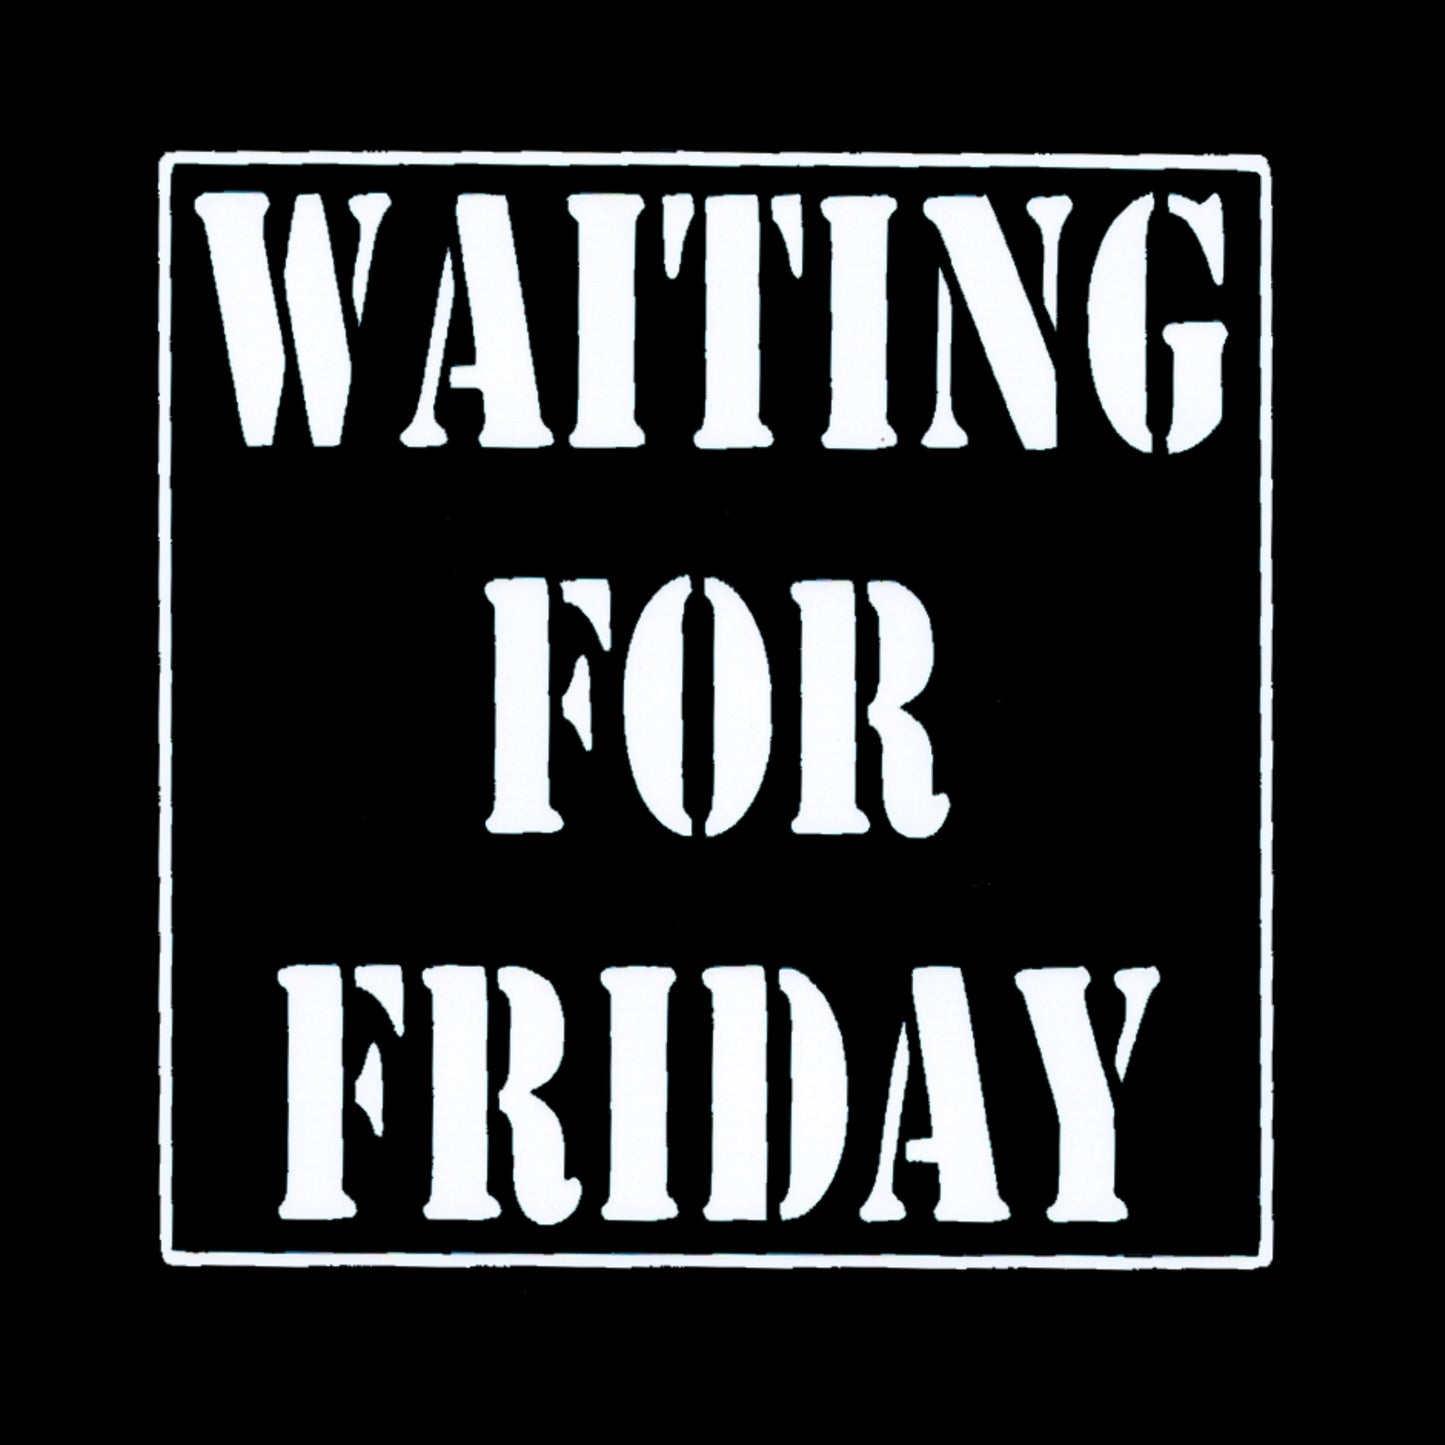 T-shirt - Waiting for friday